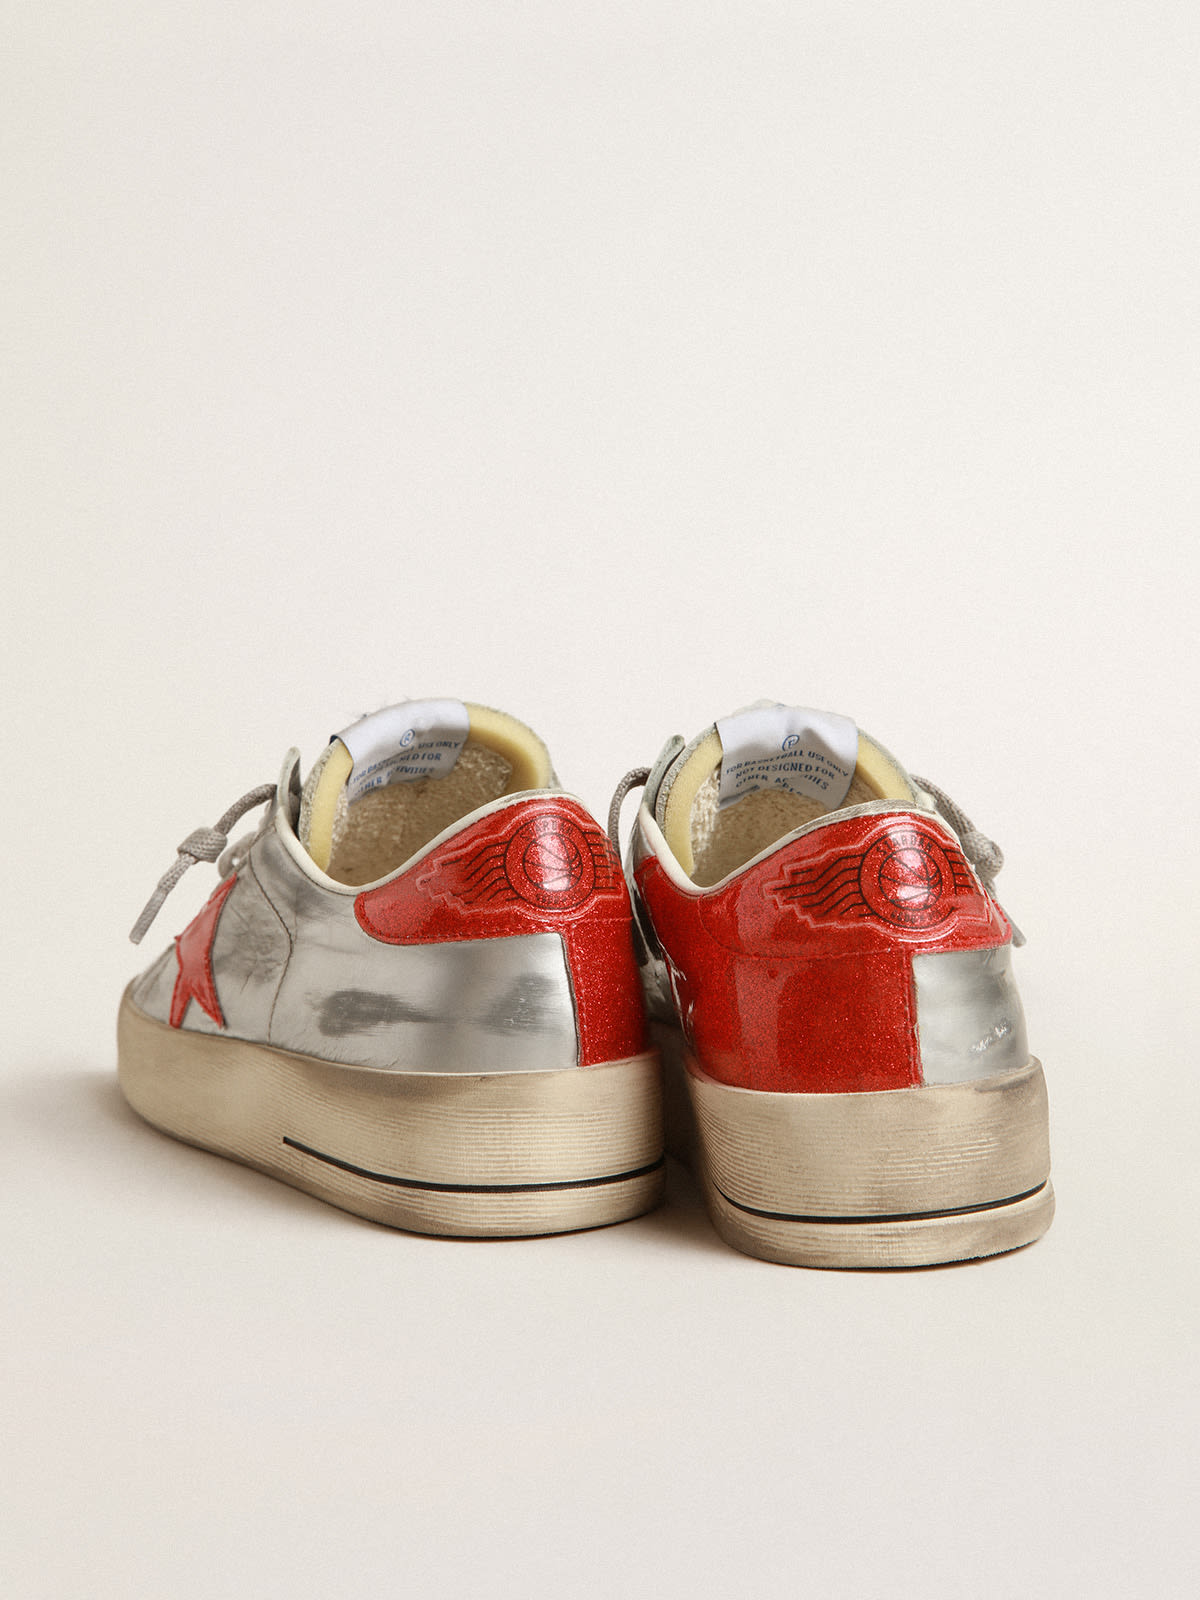 Golden Goose - Women's Stardan in laminated leather with red glitter inserts in 